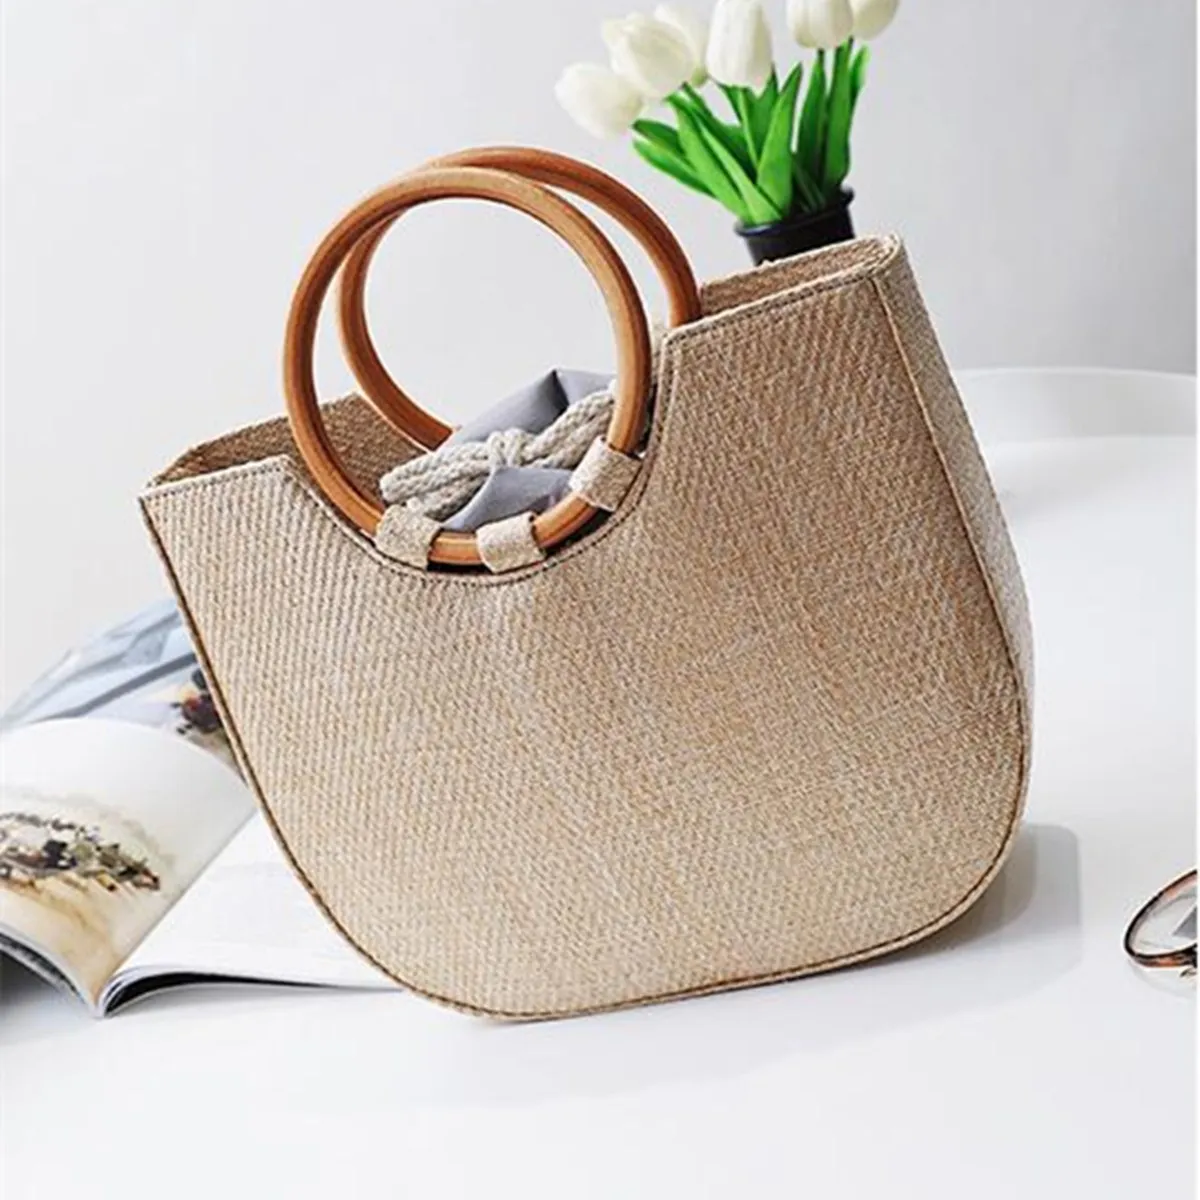 AEQUEEN 2018 Summer Circle Wooden Handle Knitted Handbag Straw Bags For Women Tote bag Rattan ...